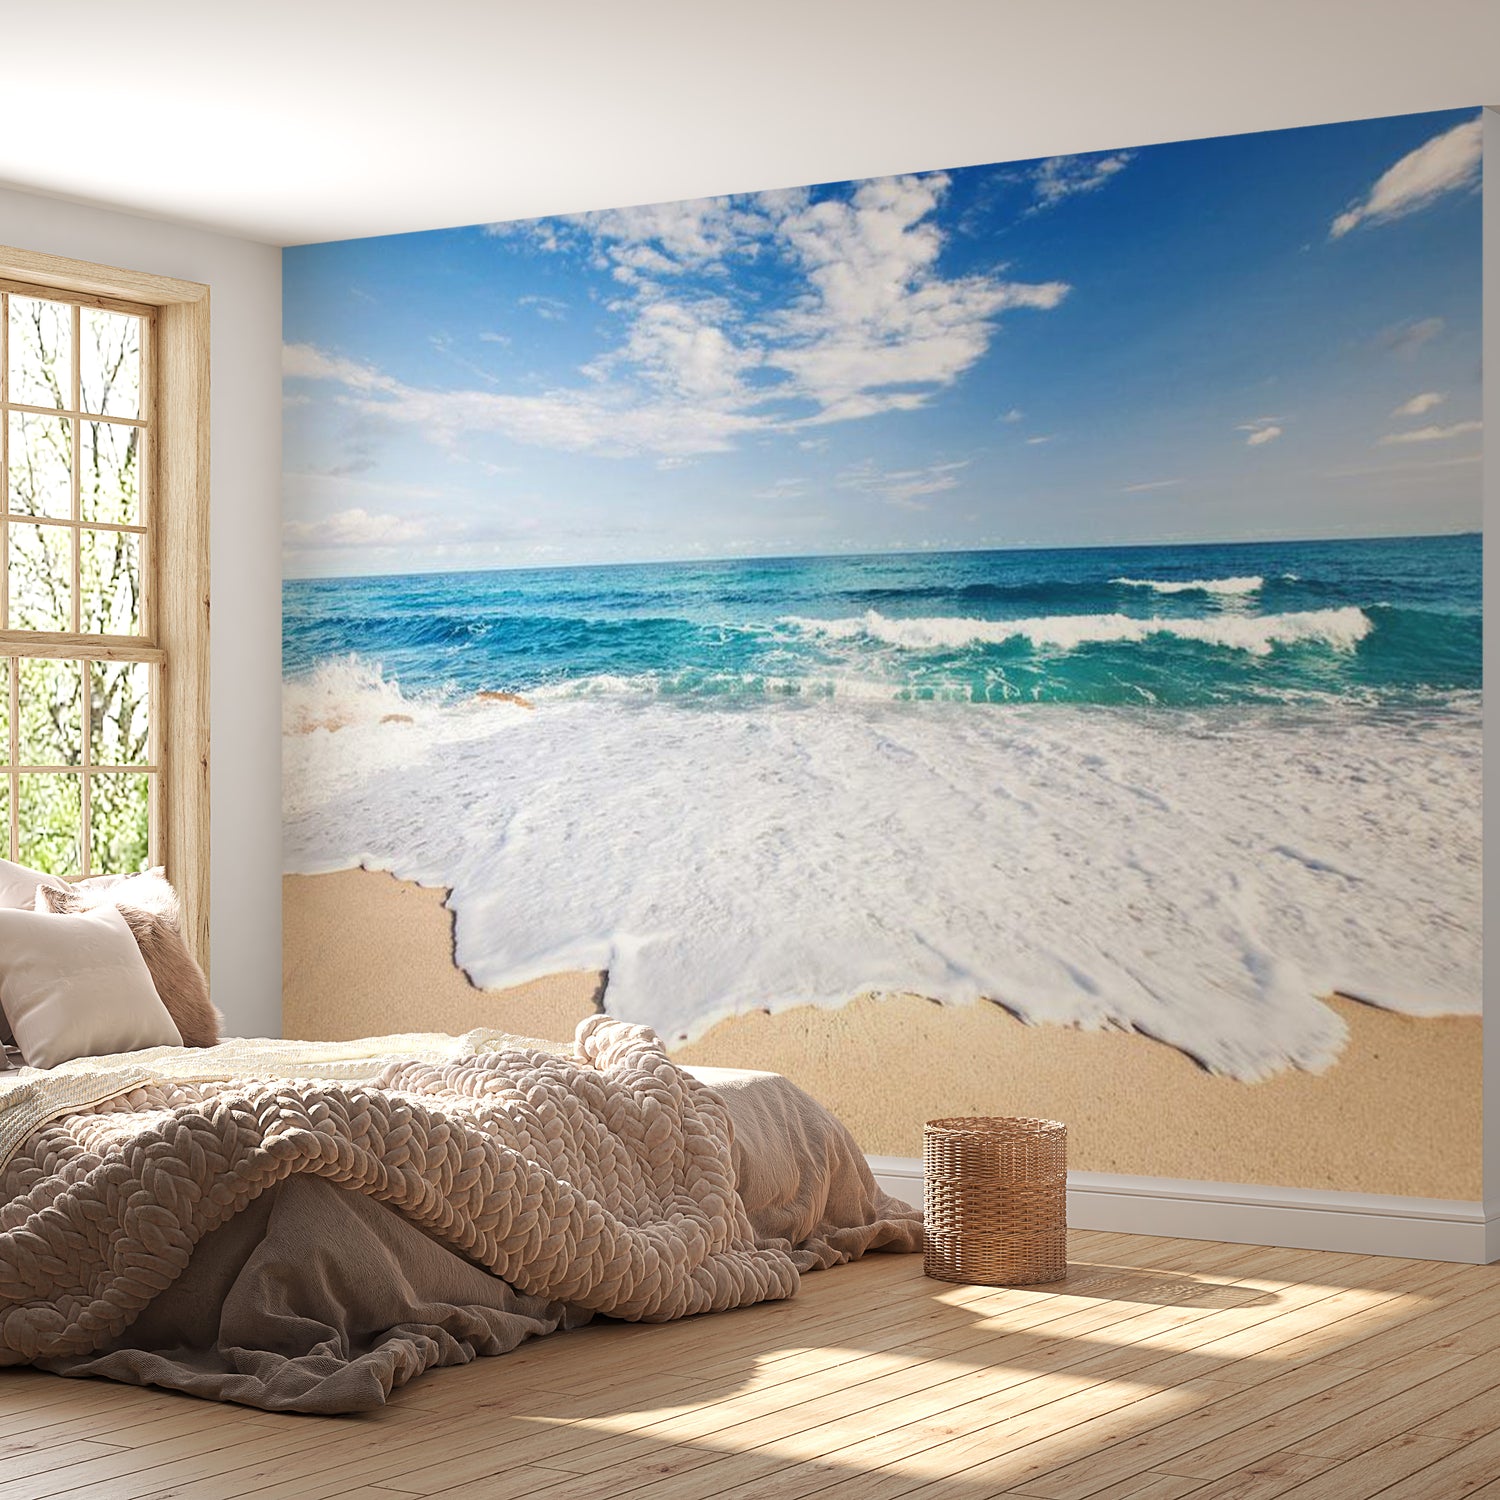 Peel & Stick Beach Wall Mural - By The Sea - Removable Wall Decals